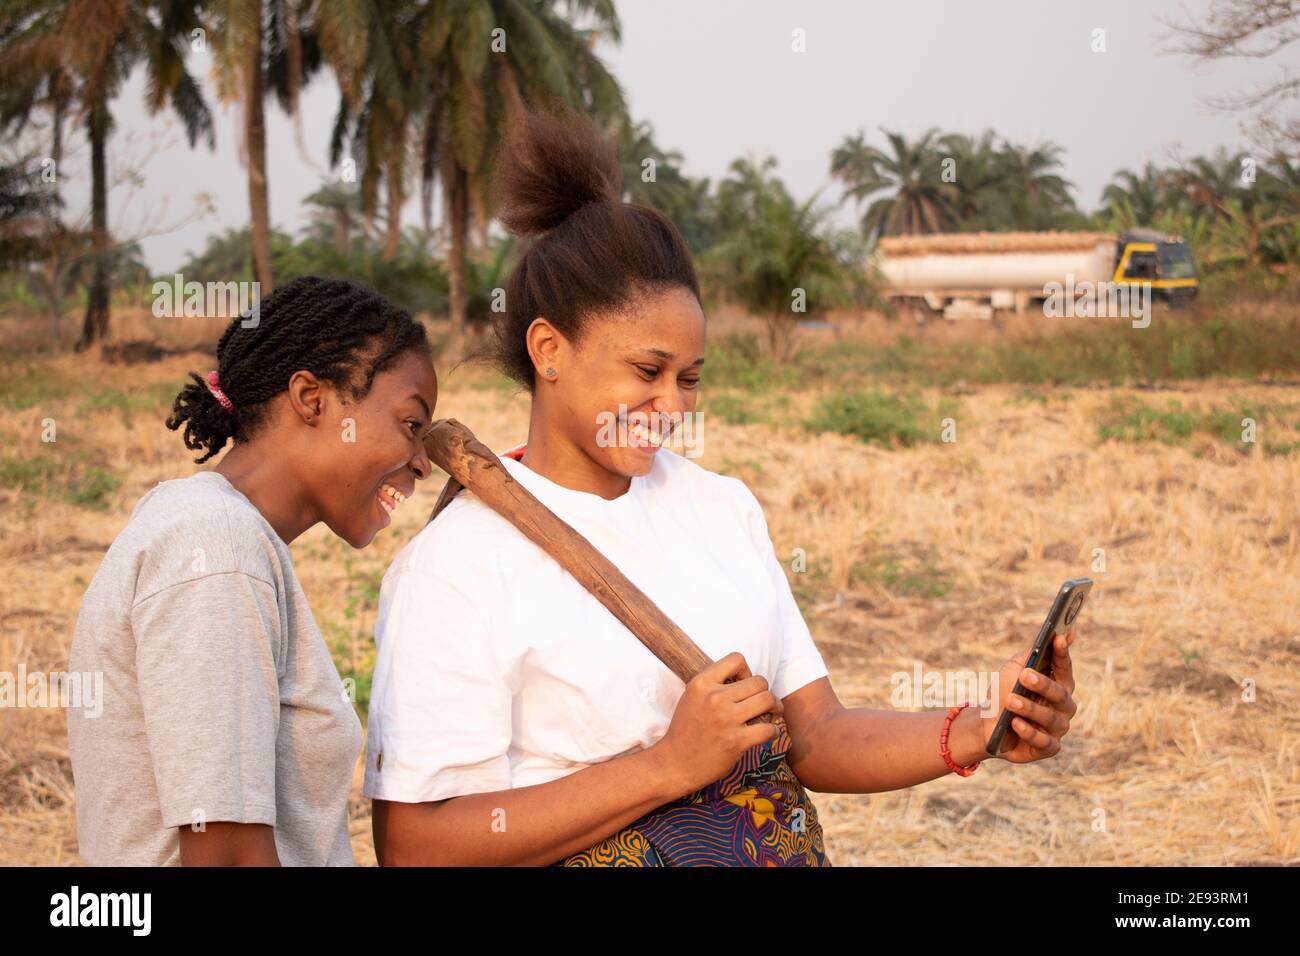 two women viewing a mobile phone at a farmland Stock Photo